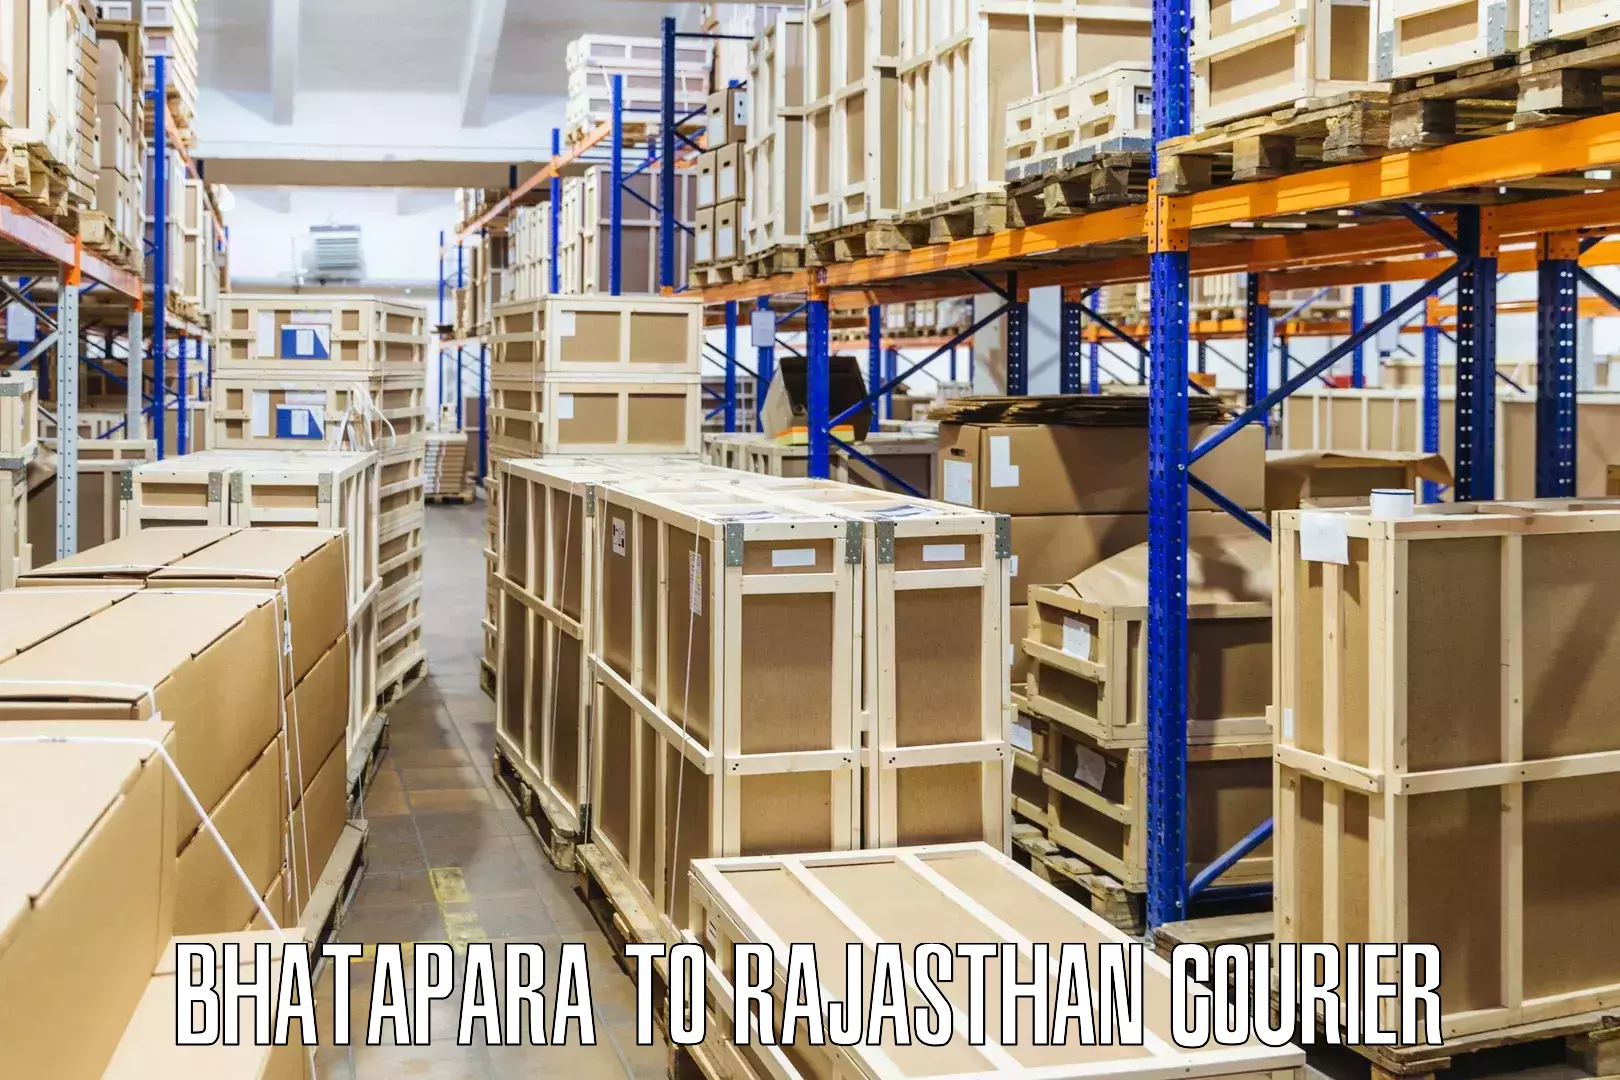 High-speed delivery Bhatapara to Rupbas